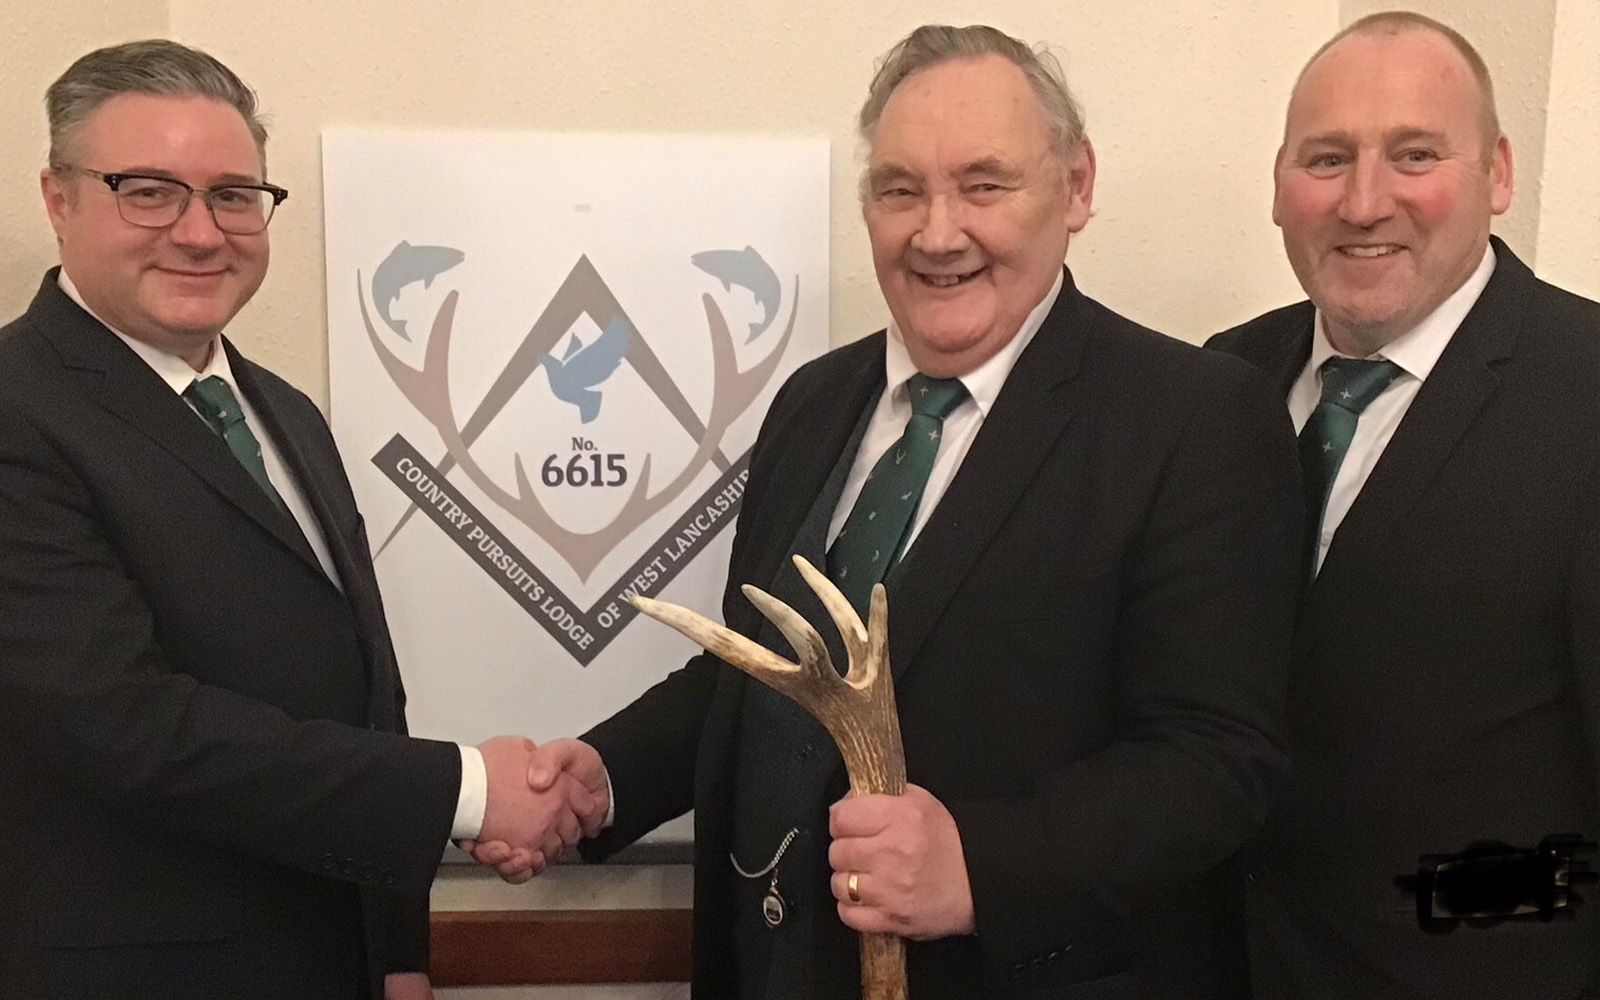 WM Mike congratulates the new initiate. Pictured, from left to right, are: Colin Hetherington (initiate), Mike Casey WM, Andy McClements